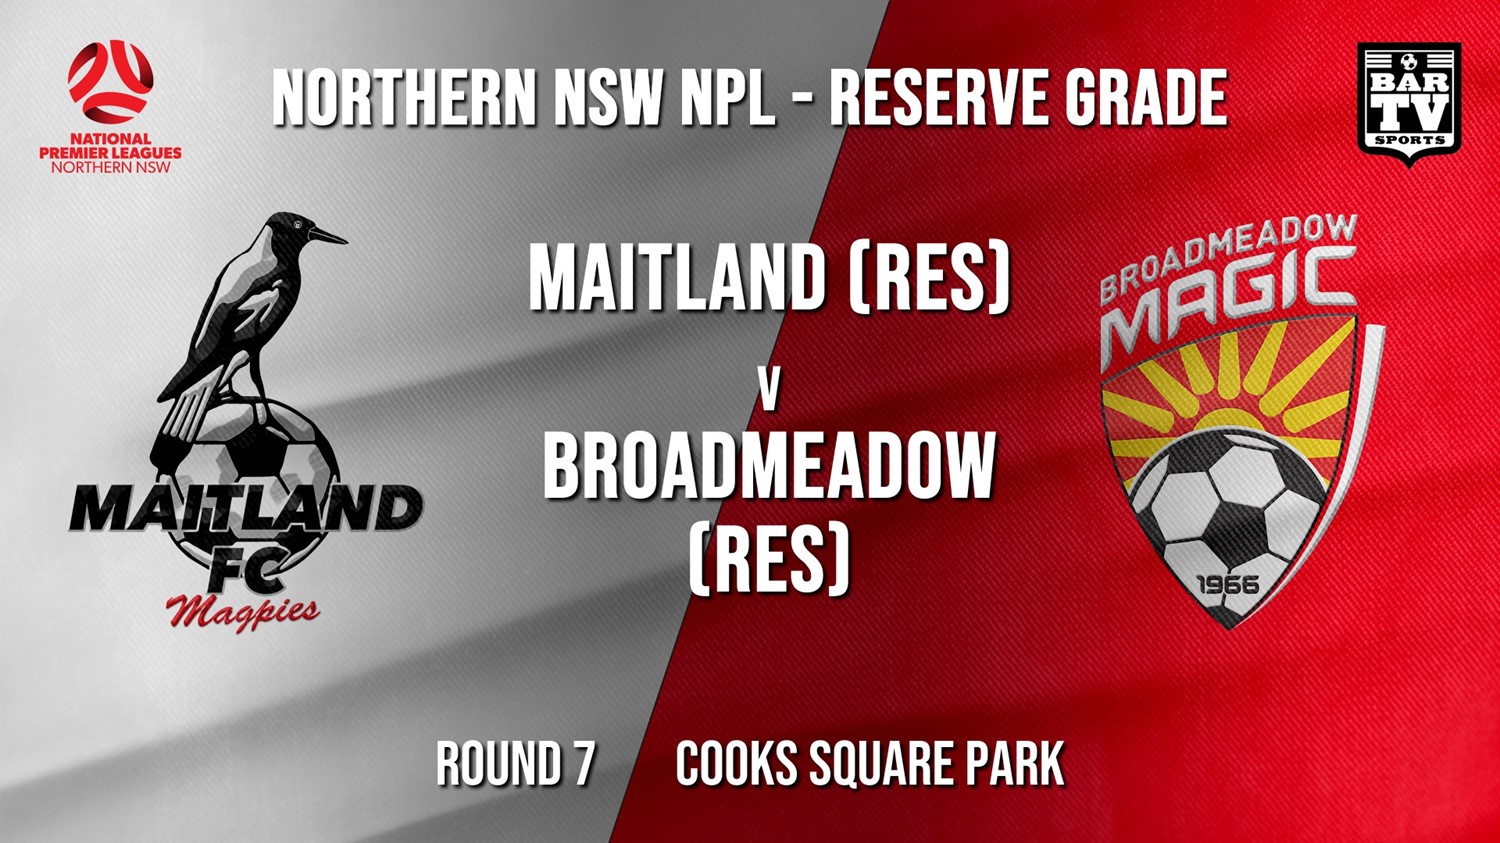 NPL NNSW RES Round 7 - Maitland FC (Res) v Broadmeadow Magic (Res) Minigame Slate Image